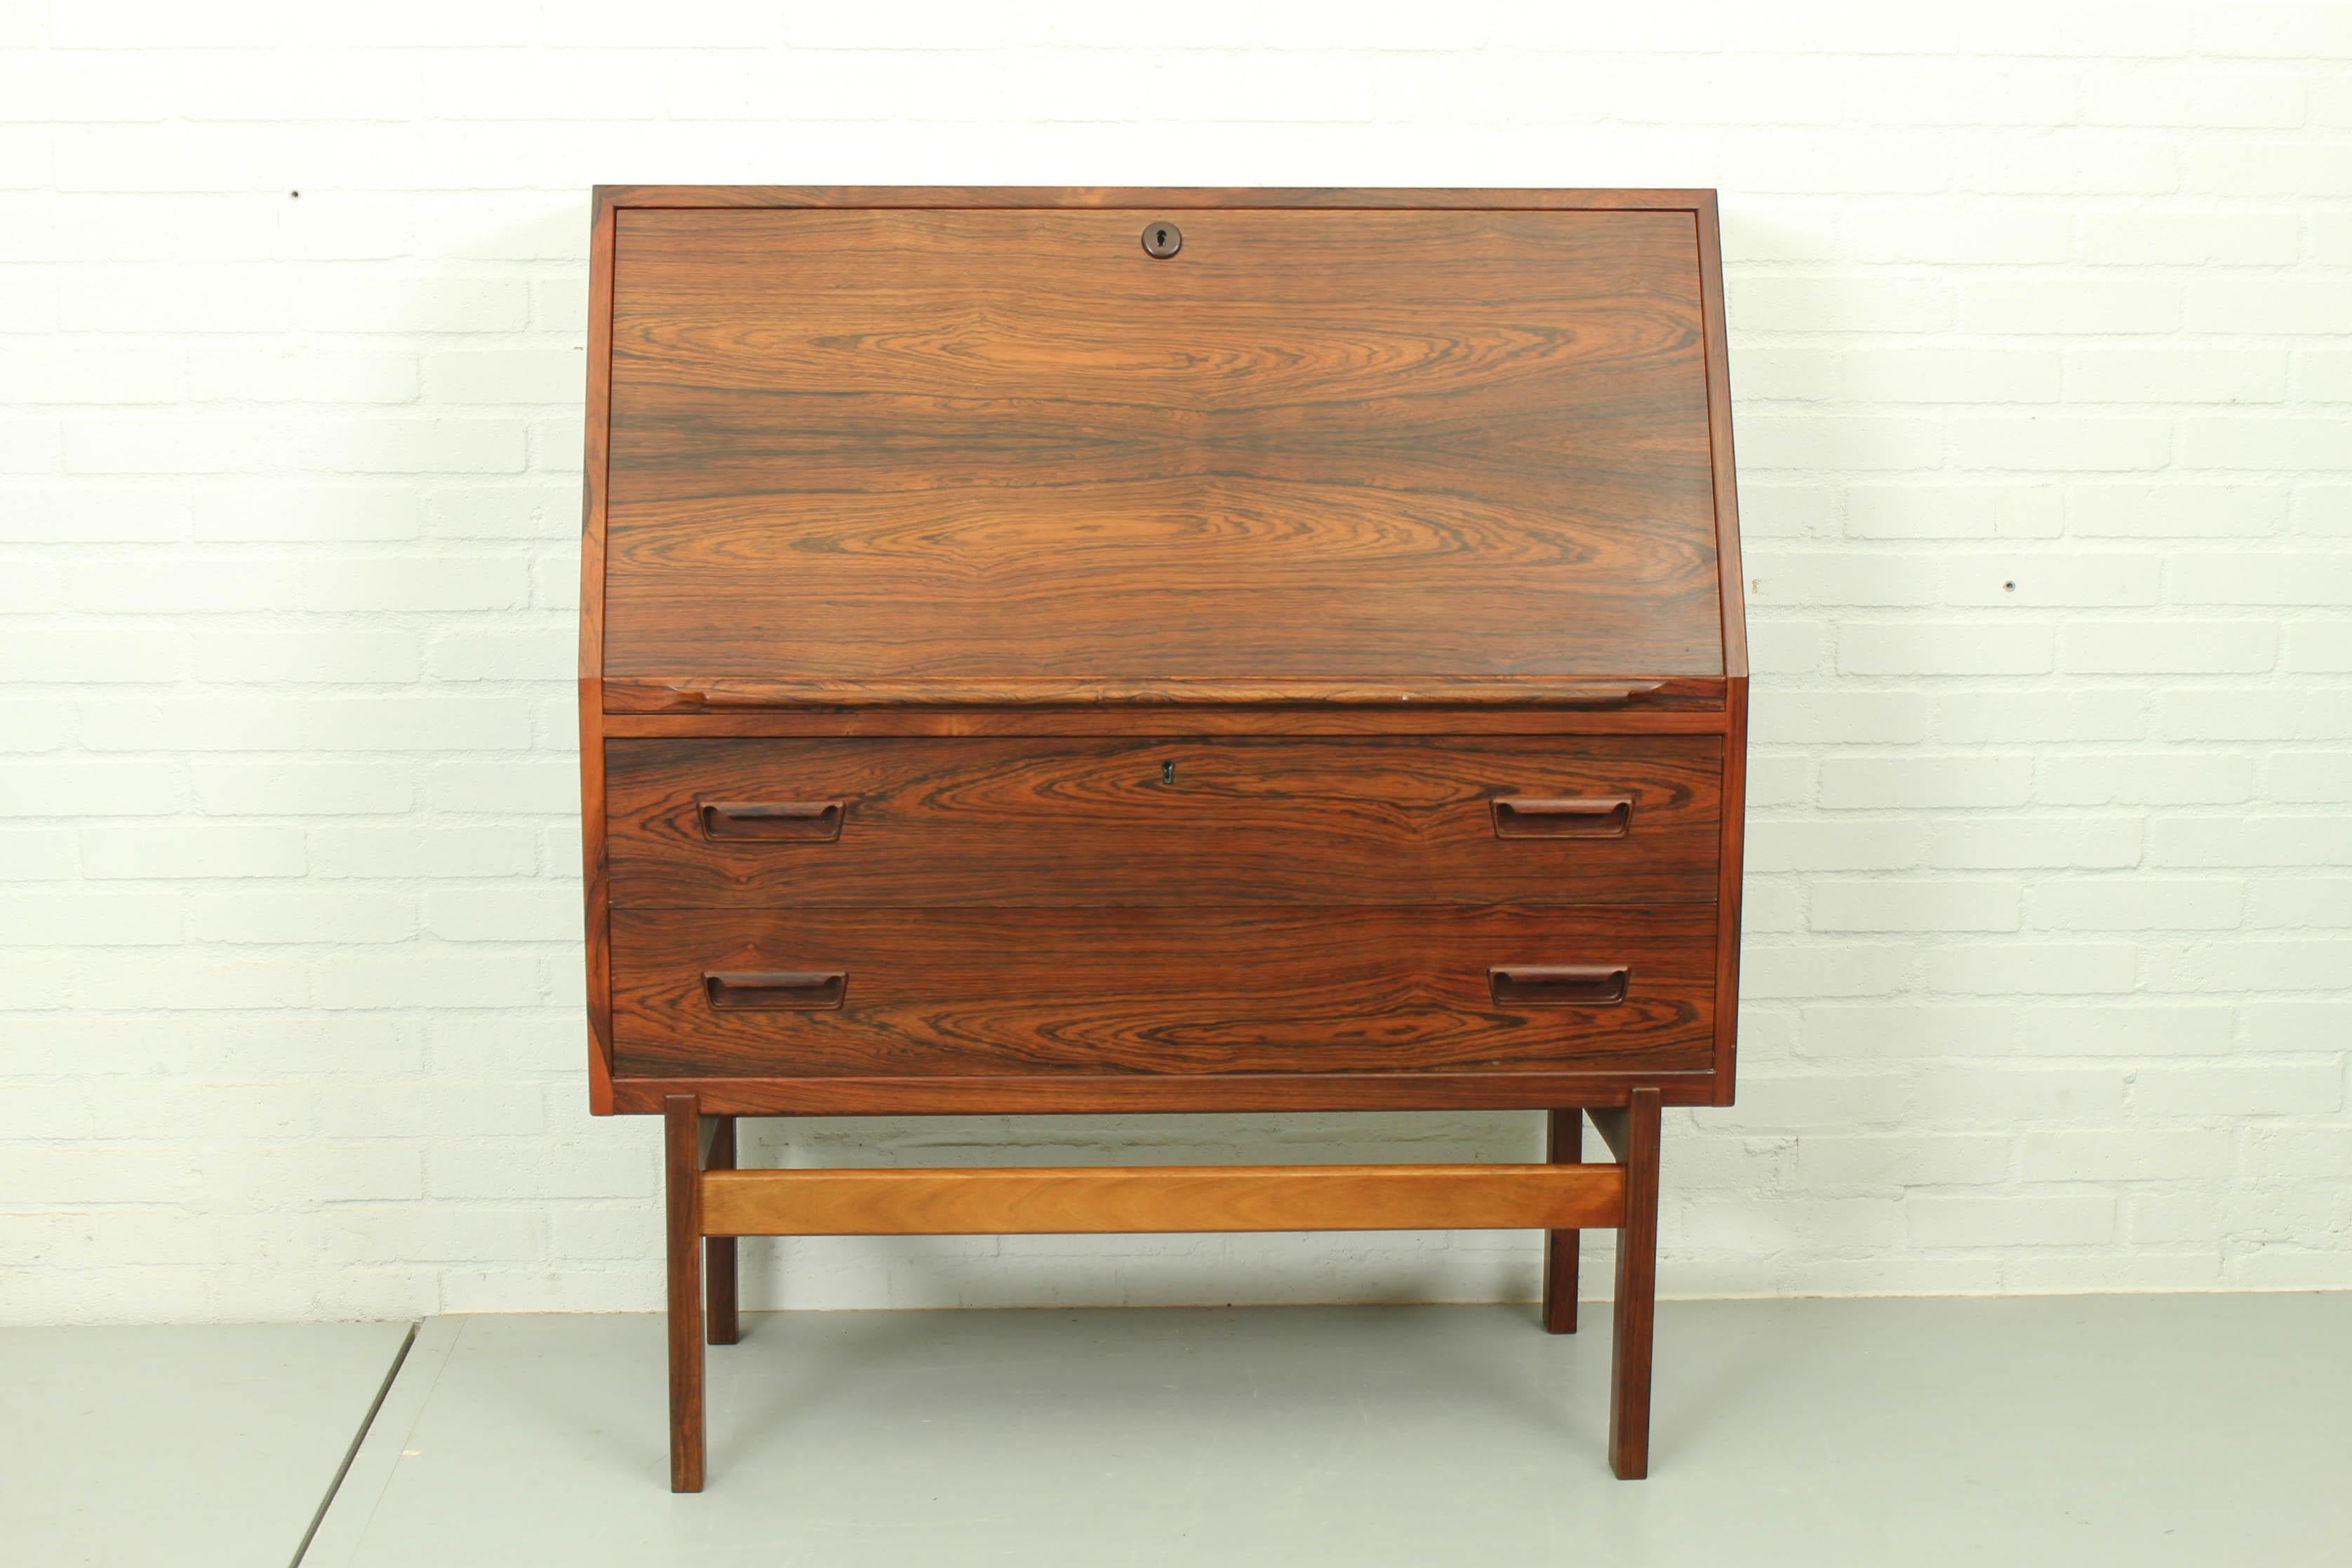 Model 68 drop front secretary desk by Arne Wahl Iversen for Vinde Mobelfabrik, 1960s. With beautiful interior drawers and storage dividers. Plenty of storage in the two drawers underneath. In very good vintage condition.

Dimensions: 108cm H, 95cm